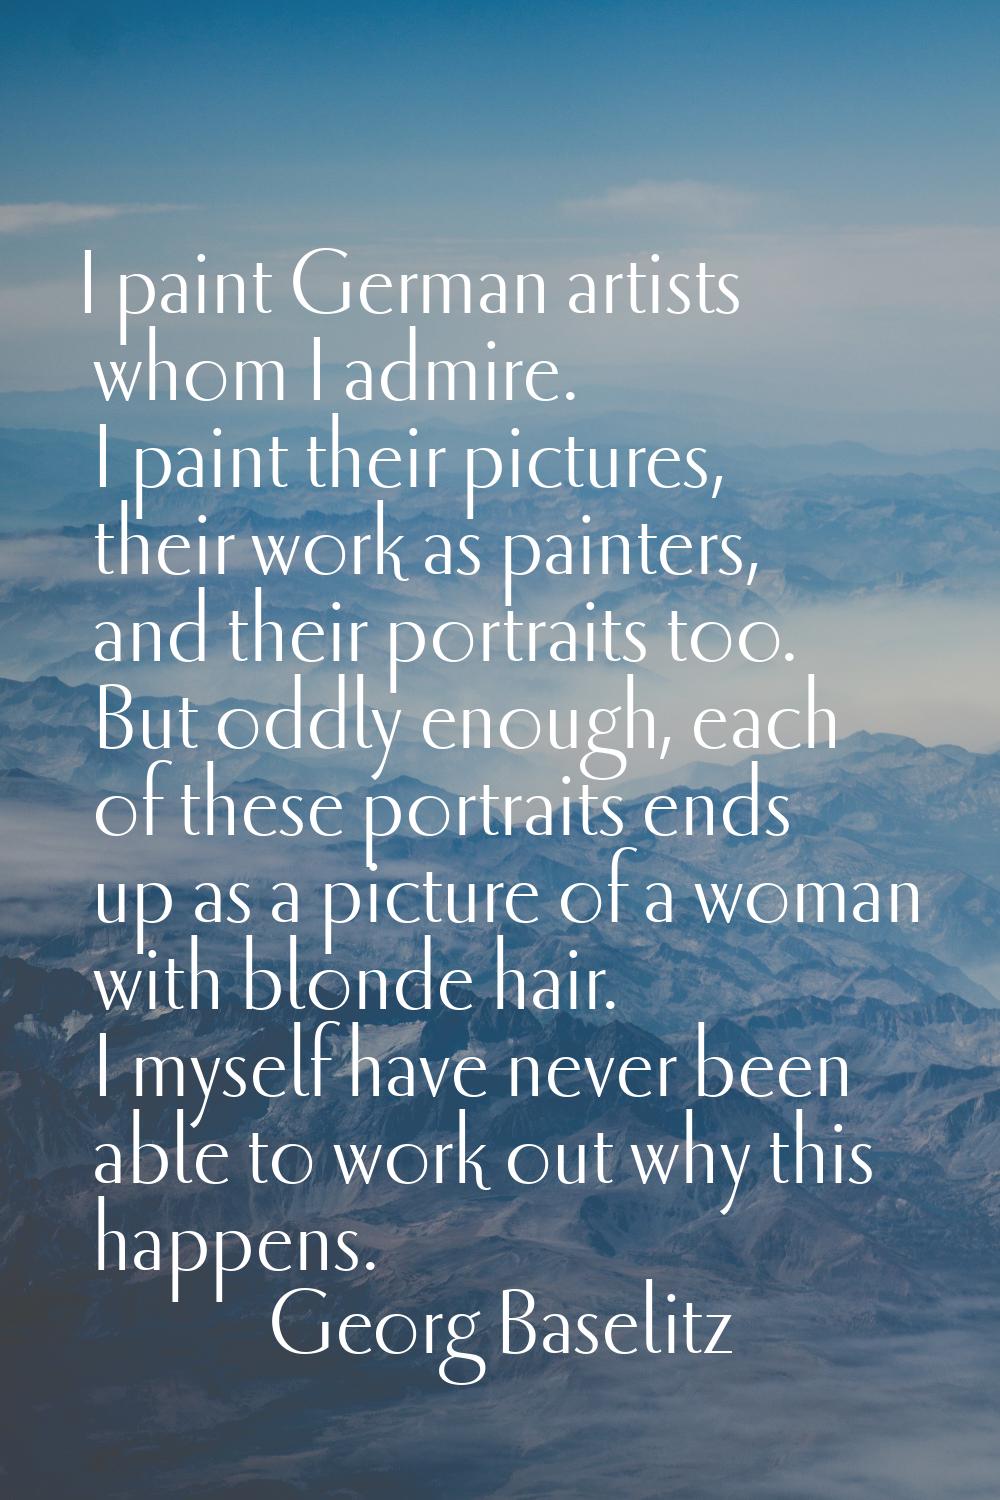 I paint German artists whom I admire. I paint their pictures, their work as painters, and their por